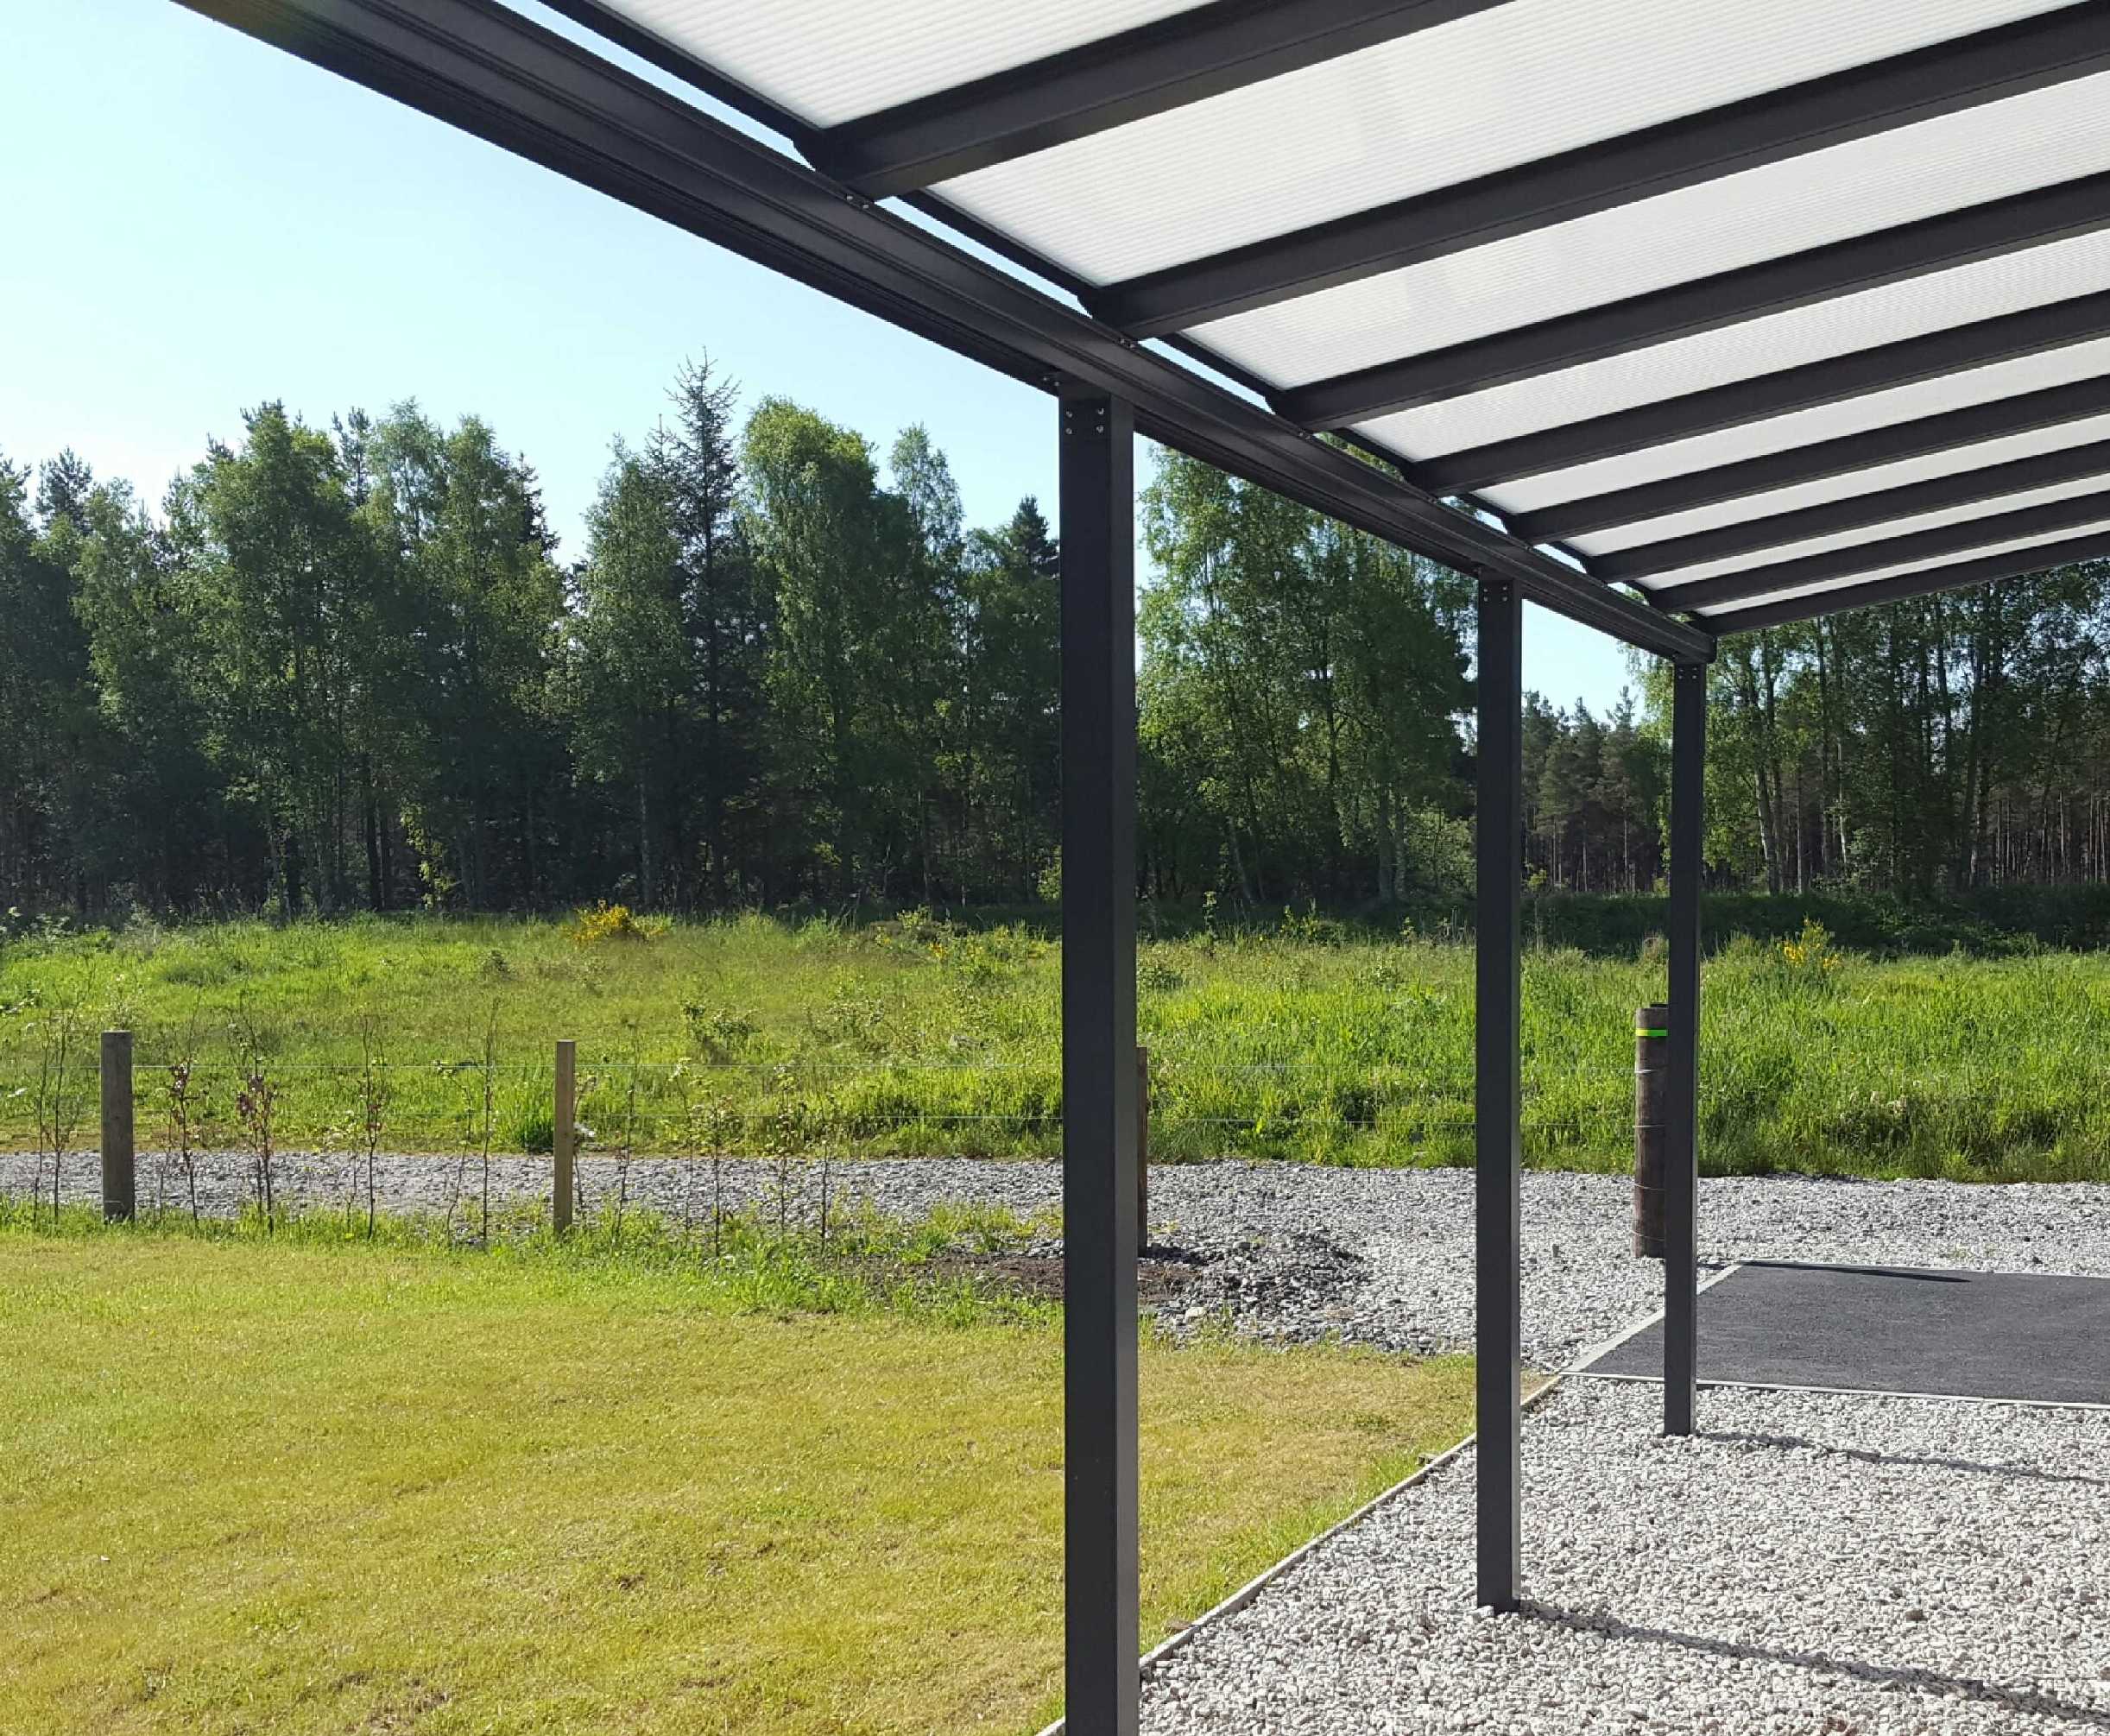 SPECIAL OFFER Omega Smart Lean-To Canopy, Anthracite Grey, 16mm Polycarbonate Glazing - 6.0m (W) x 2.0m (P), (3) Supporting Posts